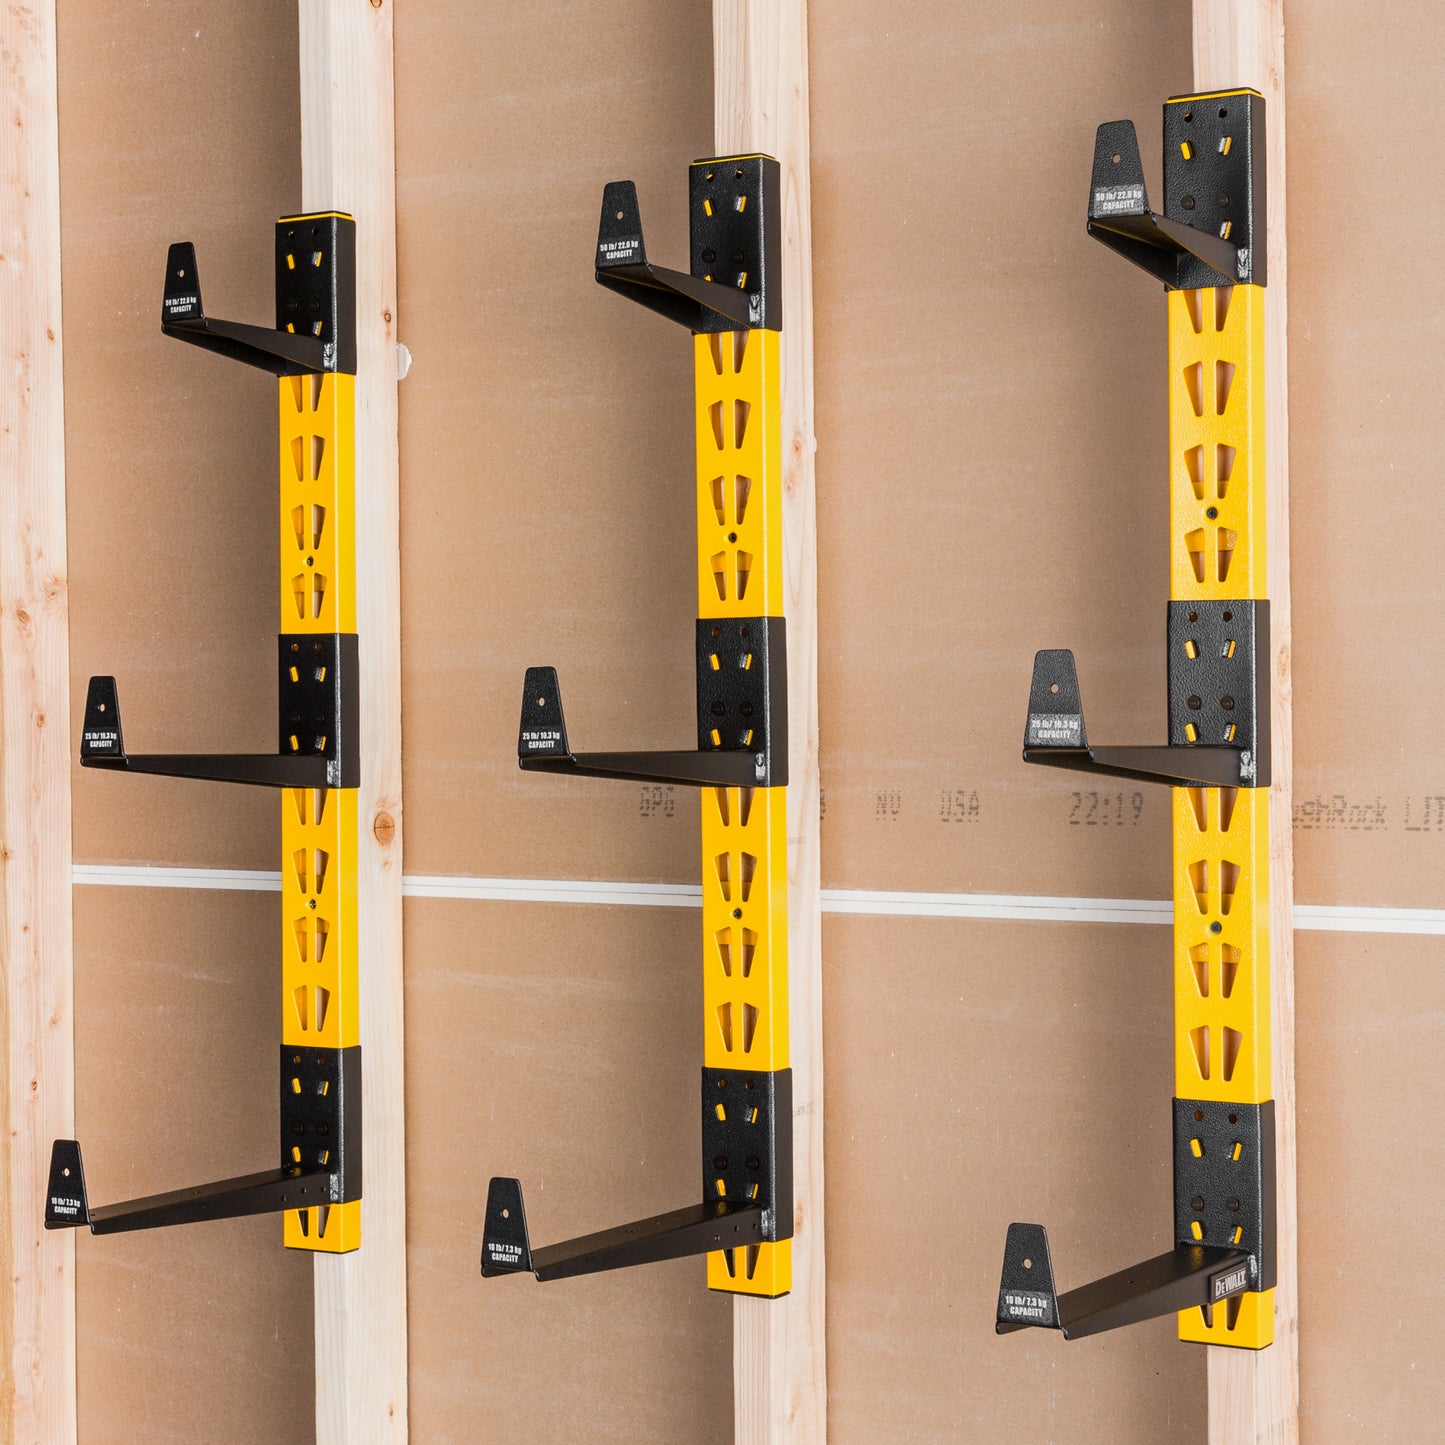 3-Piece Wall Mount Cantilever Rack